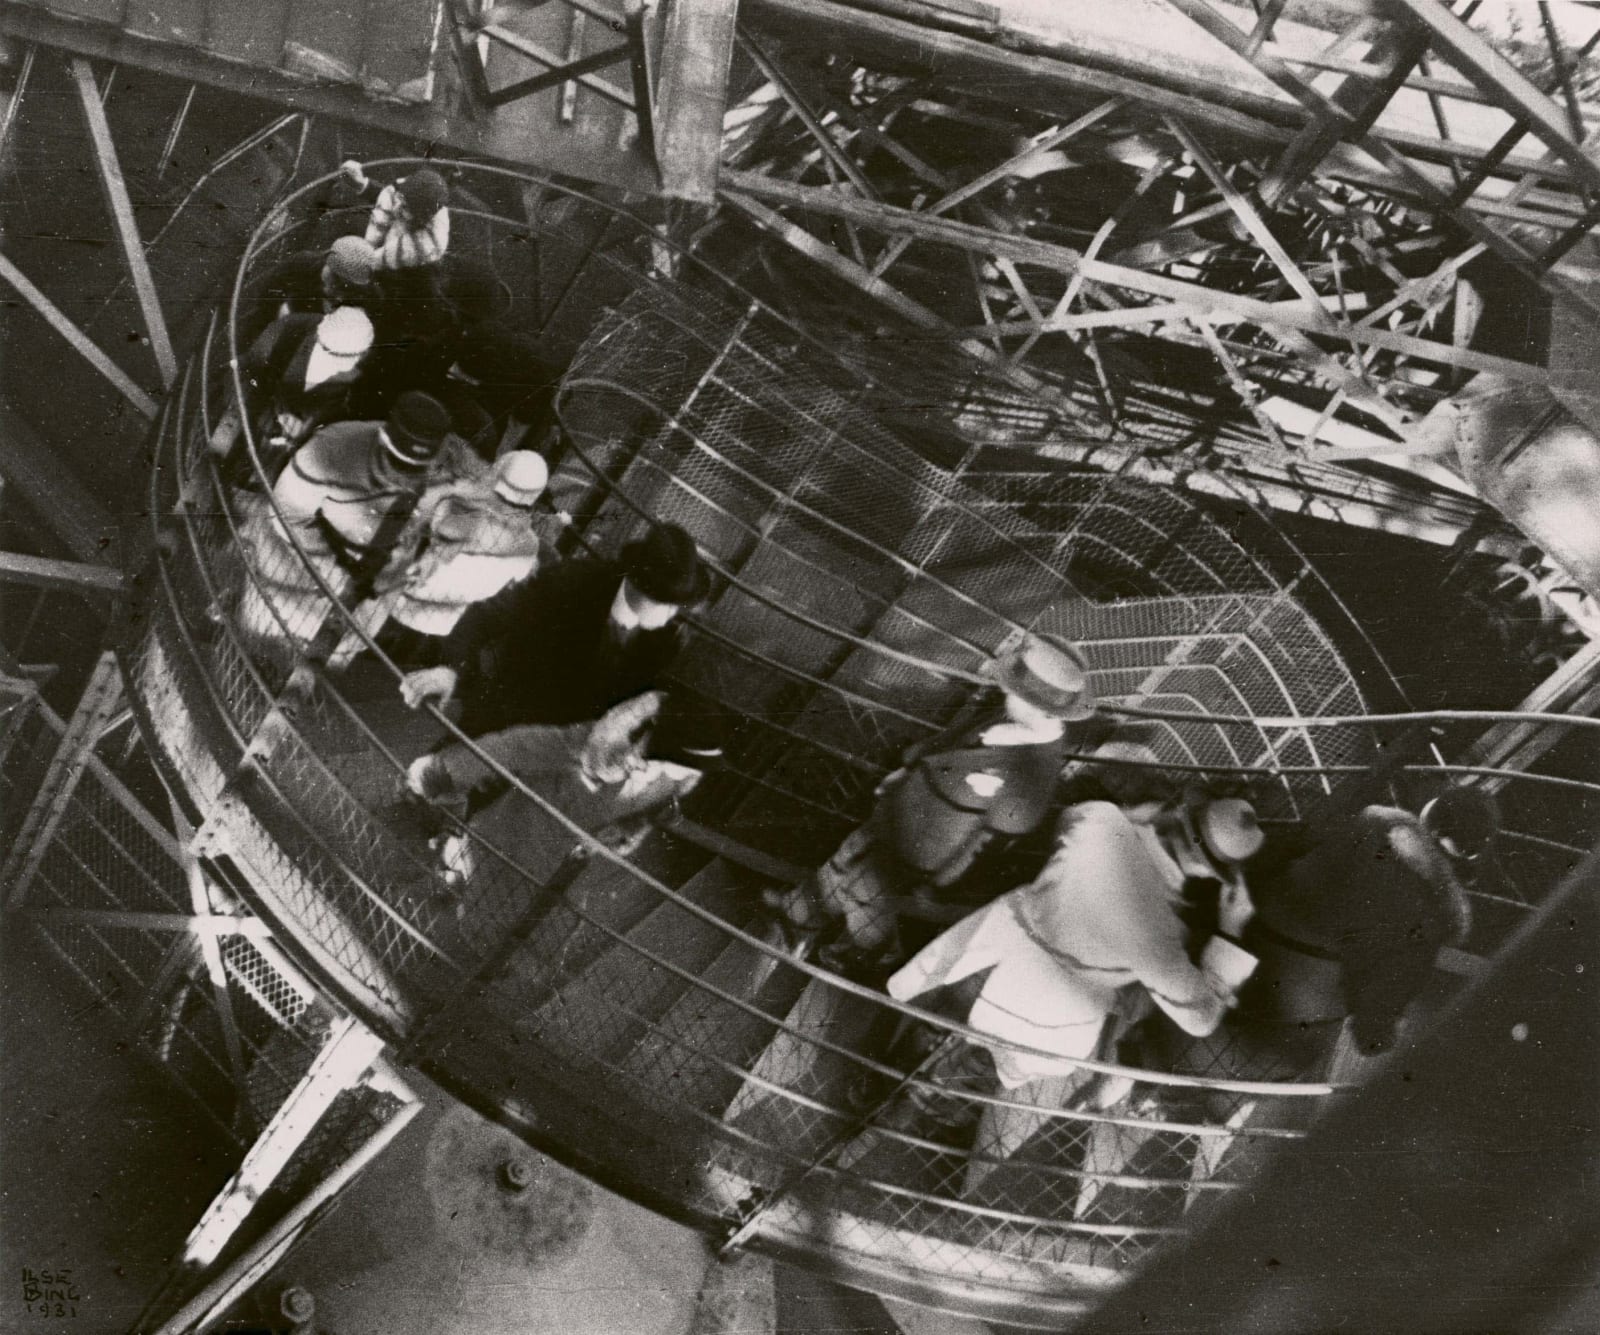 Ilse Bing photograph of visitors climbing up the stairs to the Eiffel Tower Paris